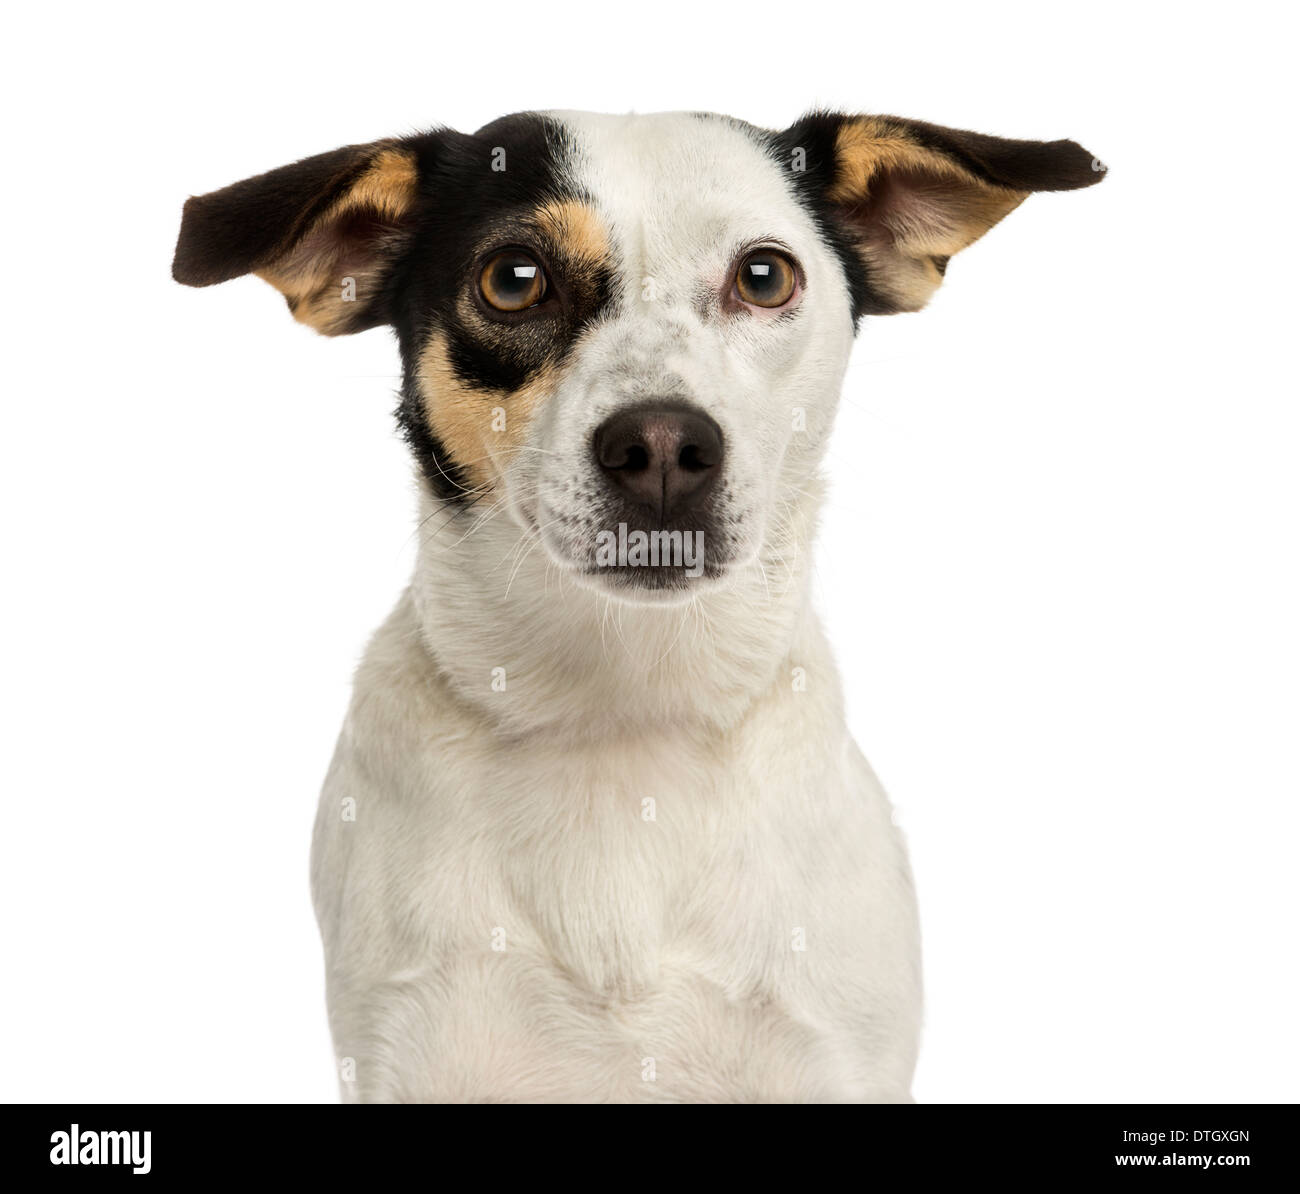 Close-up of a Jack Russel terrier looking at the camera against white background Stock Photo